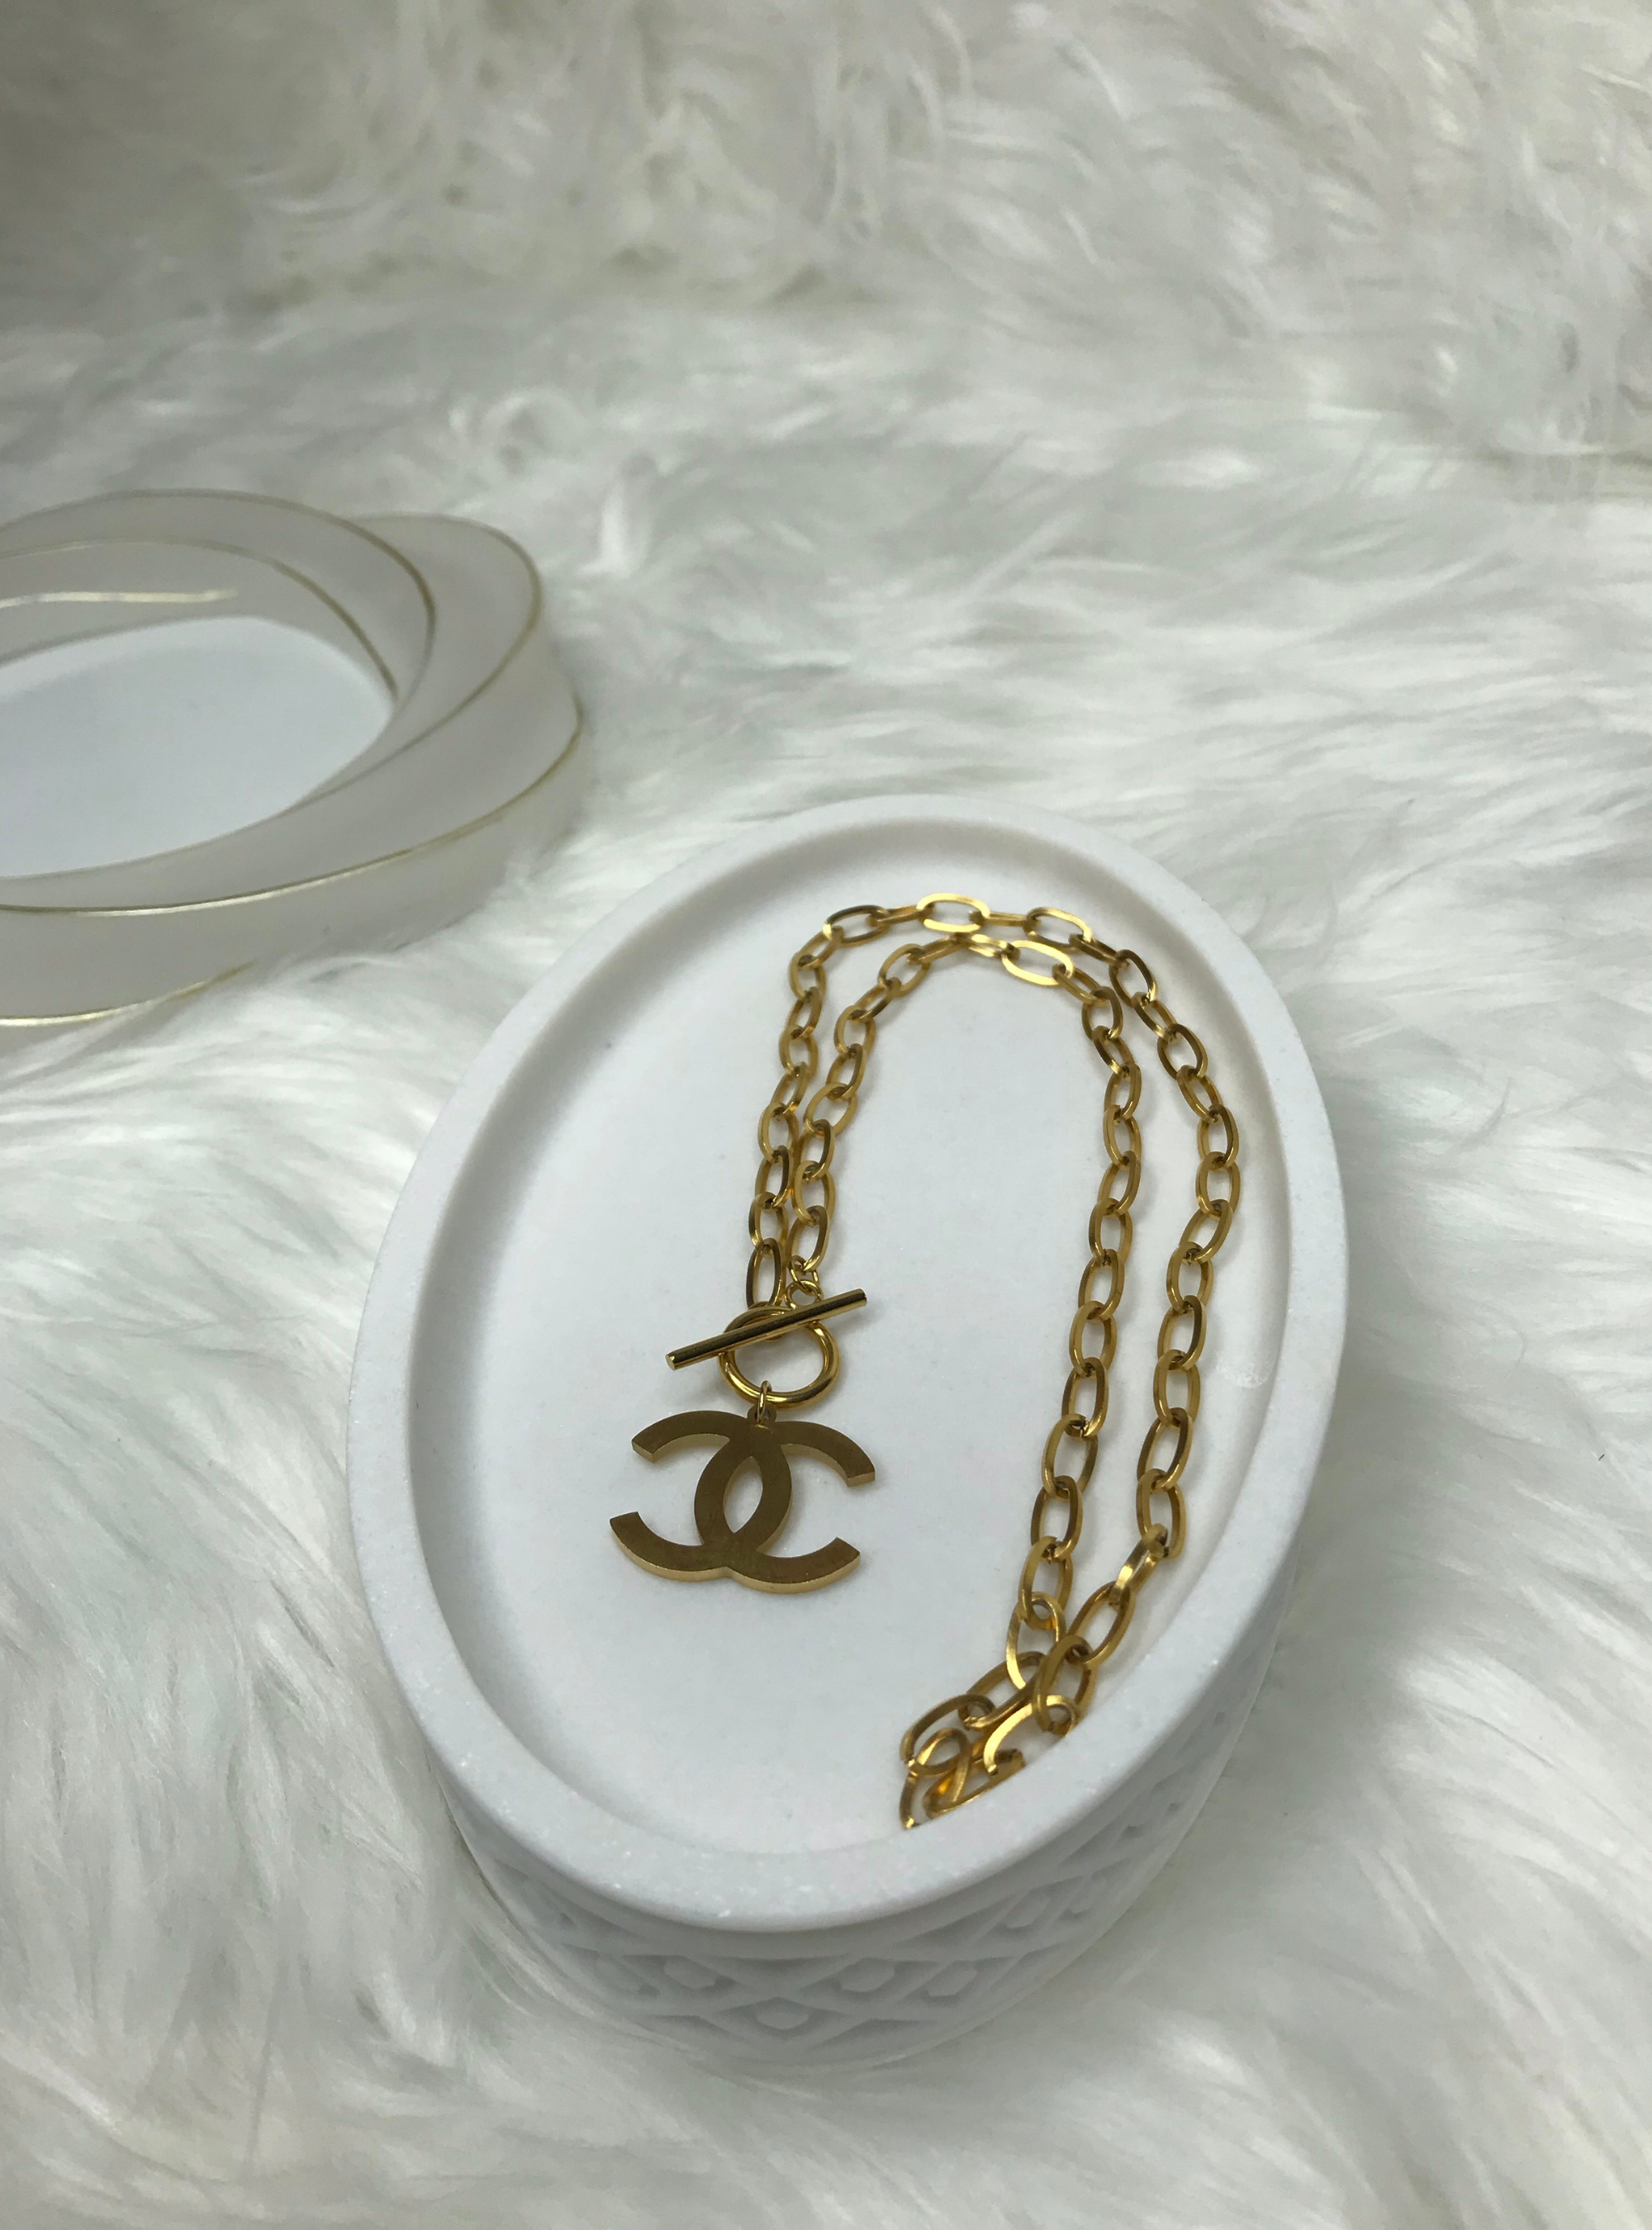 silver chanel charm necklace